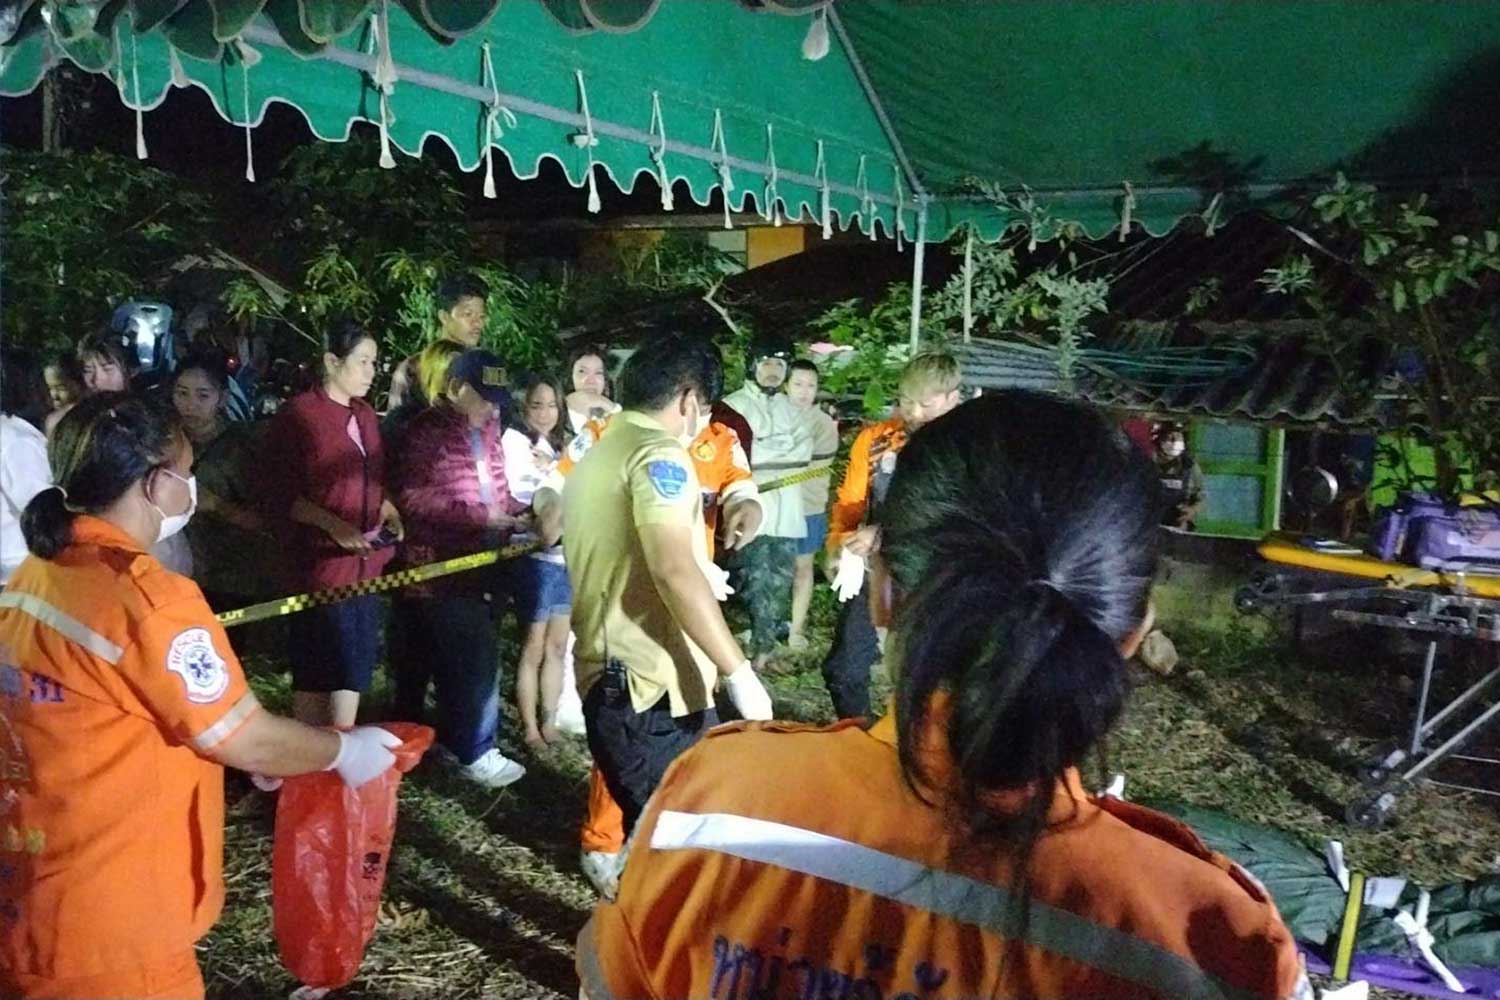 5 Dead After Groom Shoots Bride, Her Family, Then Himself at Wedding in Thailand